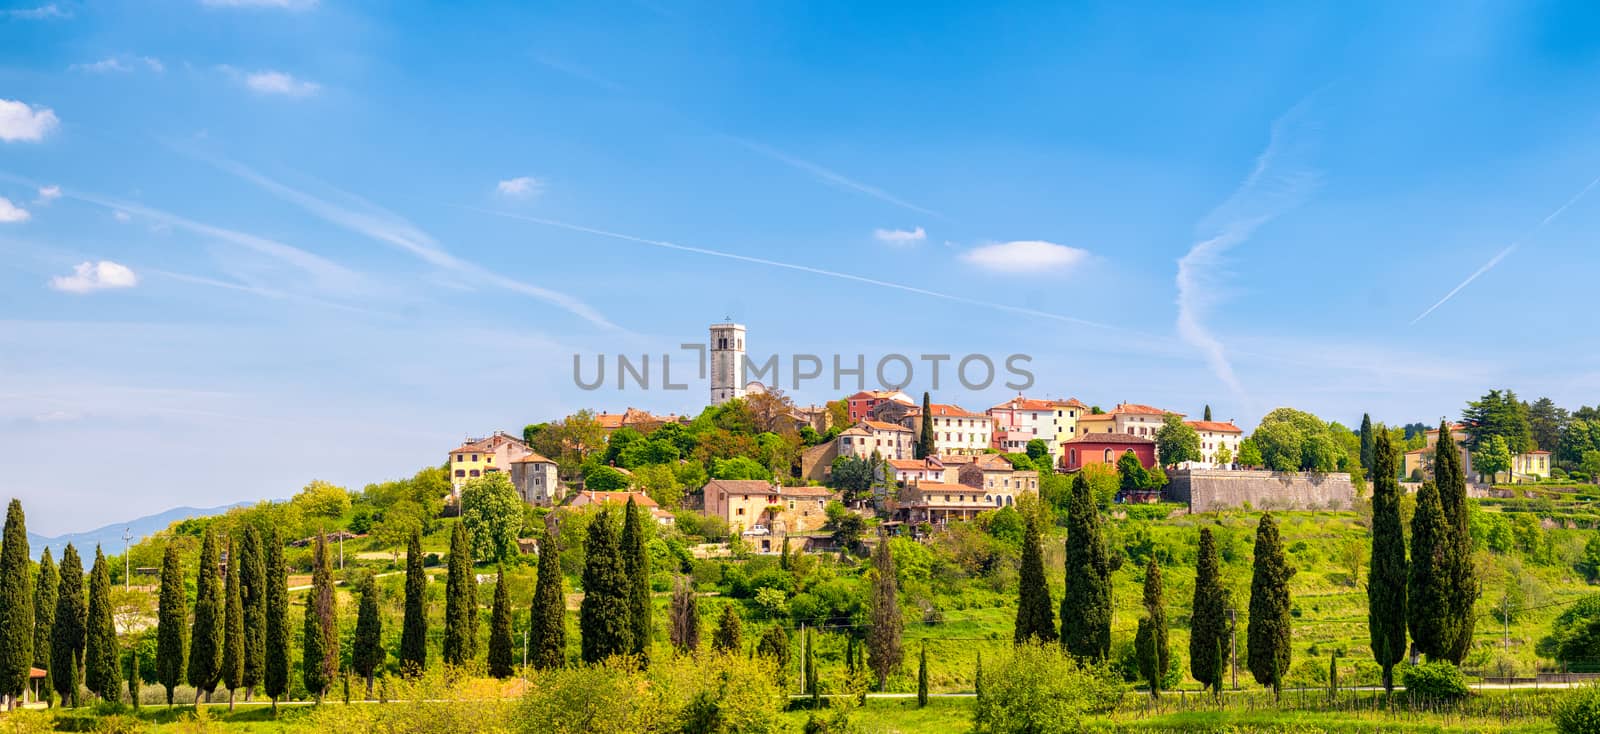 Oprtalj - idyllic small town on a hill in central Istria, resembles very much Toscany landscape and achitecture